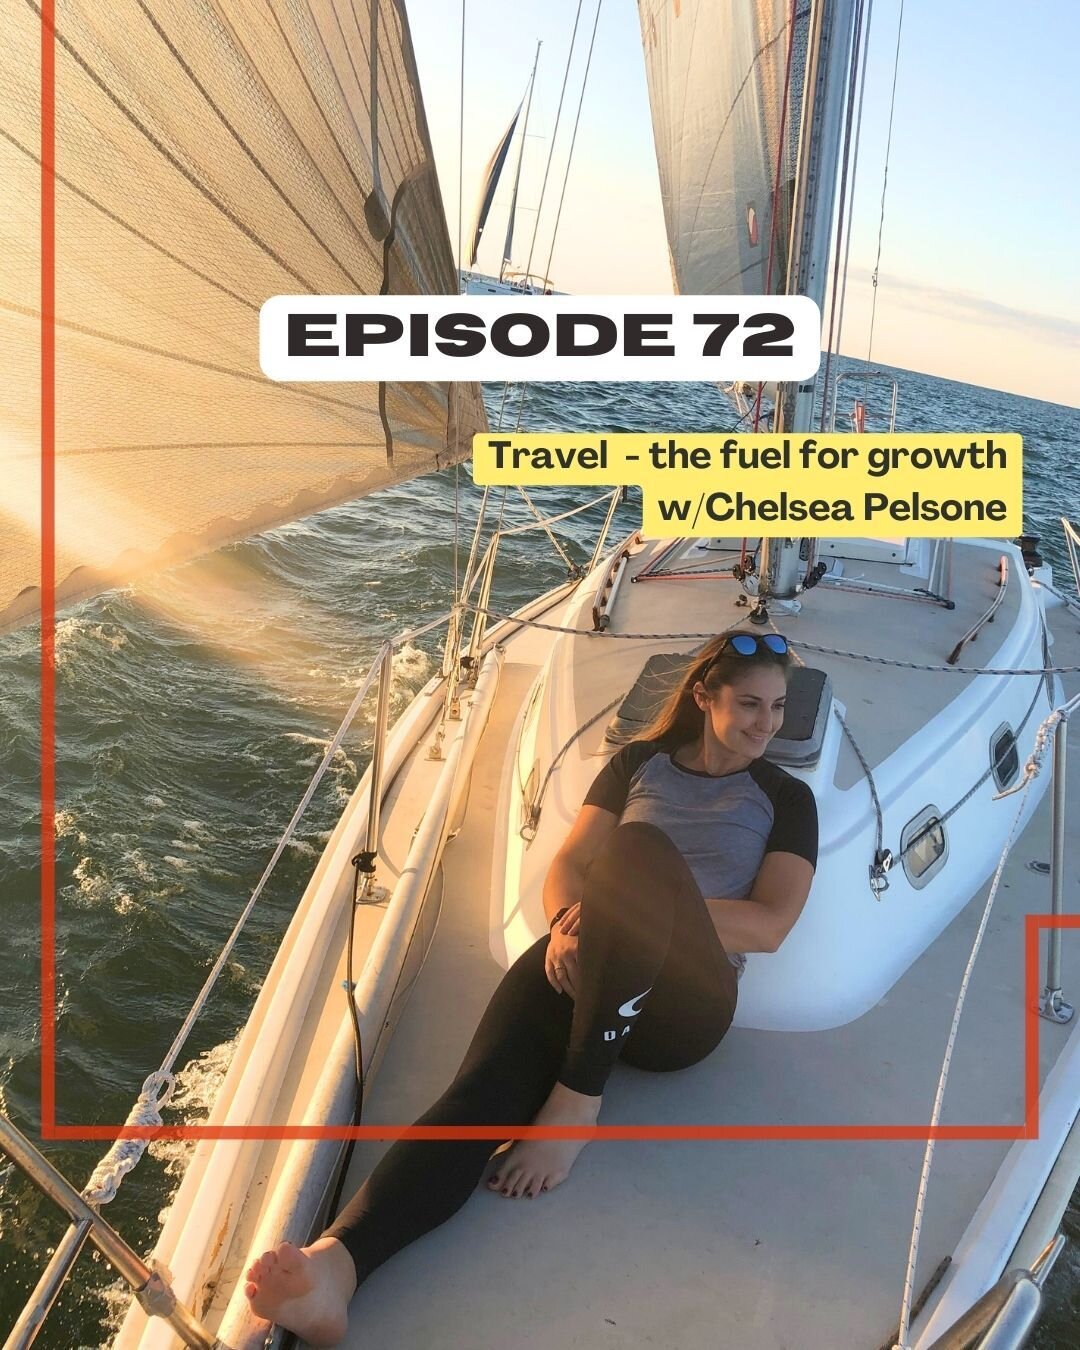 When faced with numerous obstacles in recent years, Chelsea Pelsone could have easily crumbled. Instead, she prioritized her passions and rewrote her own story. Tune in to Episode 72 to hear about the unexpected turns Chels faced and how she turned h